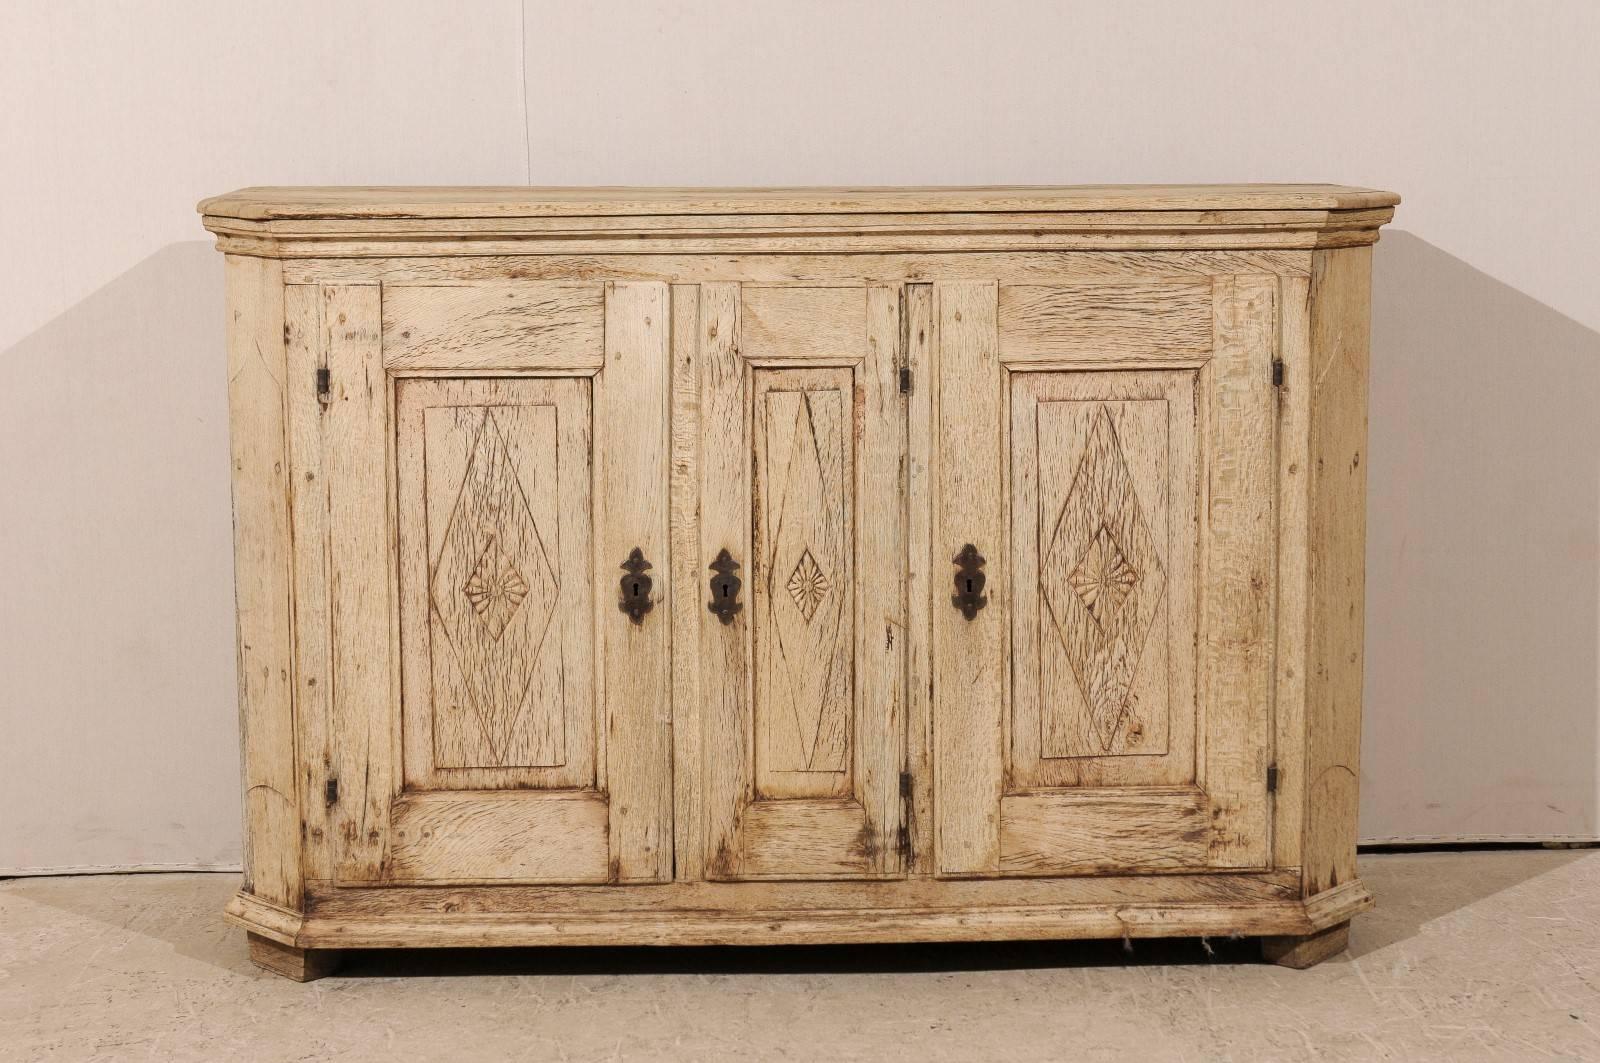 A French early 19th century sideboard. This French sideboard features three doors with diamond and floral carvings that open to interior shelves for great storage space. The side posts are canted. This piece has a natural pale wood finish. This